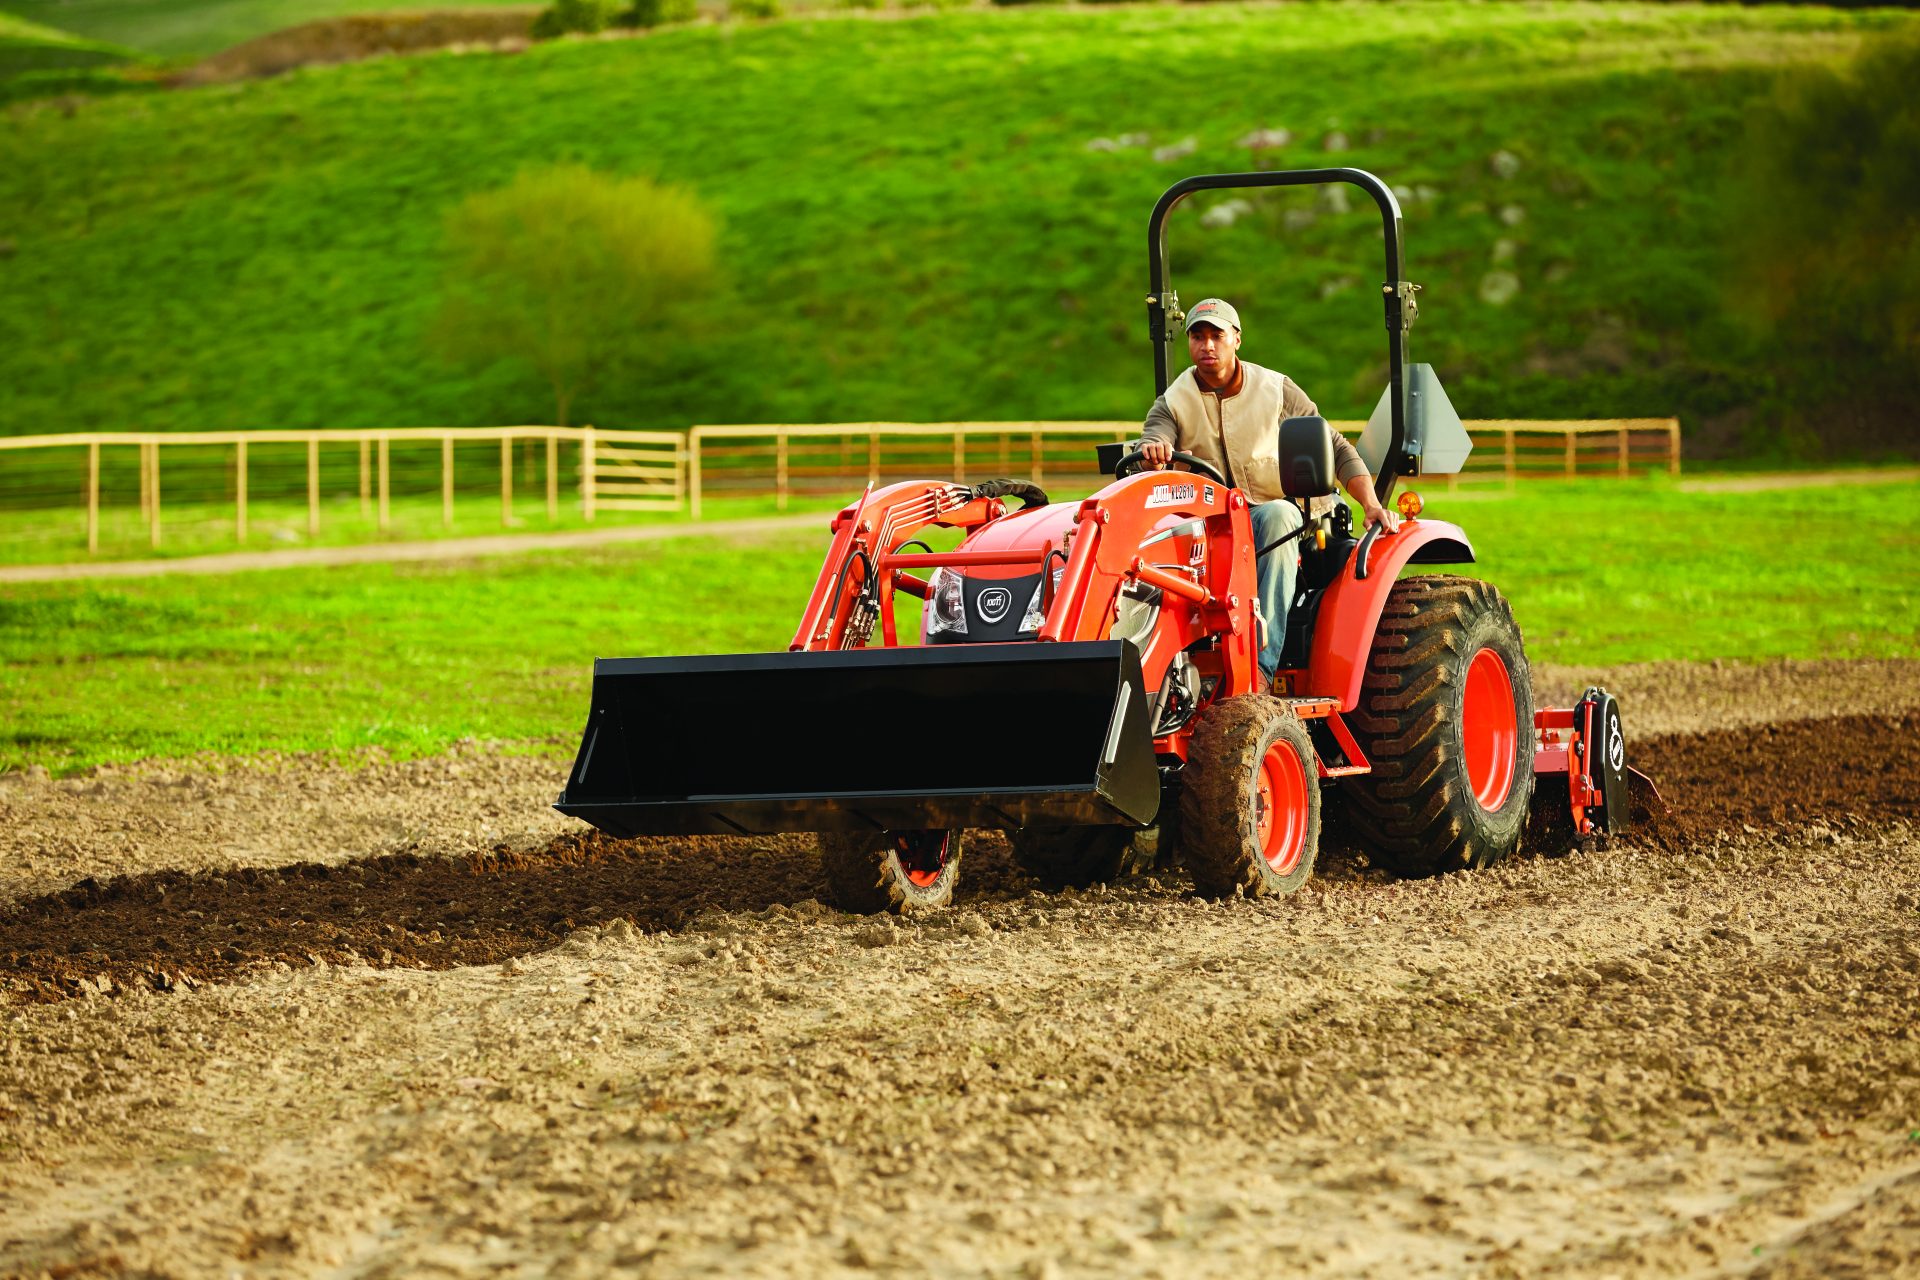 KIOTI CK-3520: A Versatile and Reliable Compact Tractor